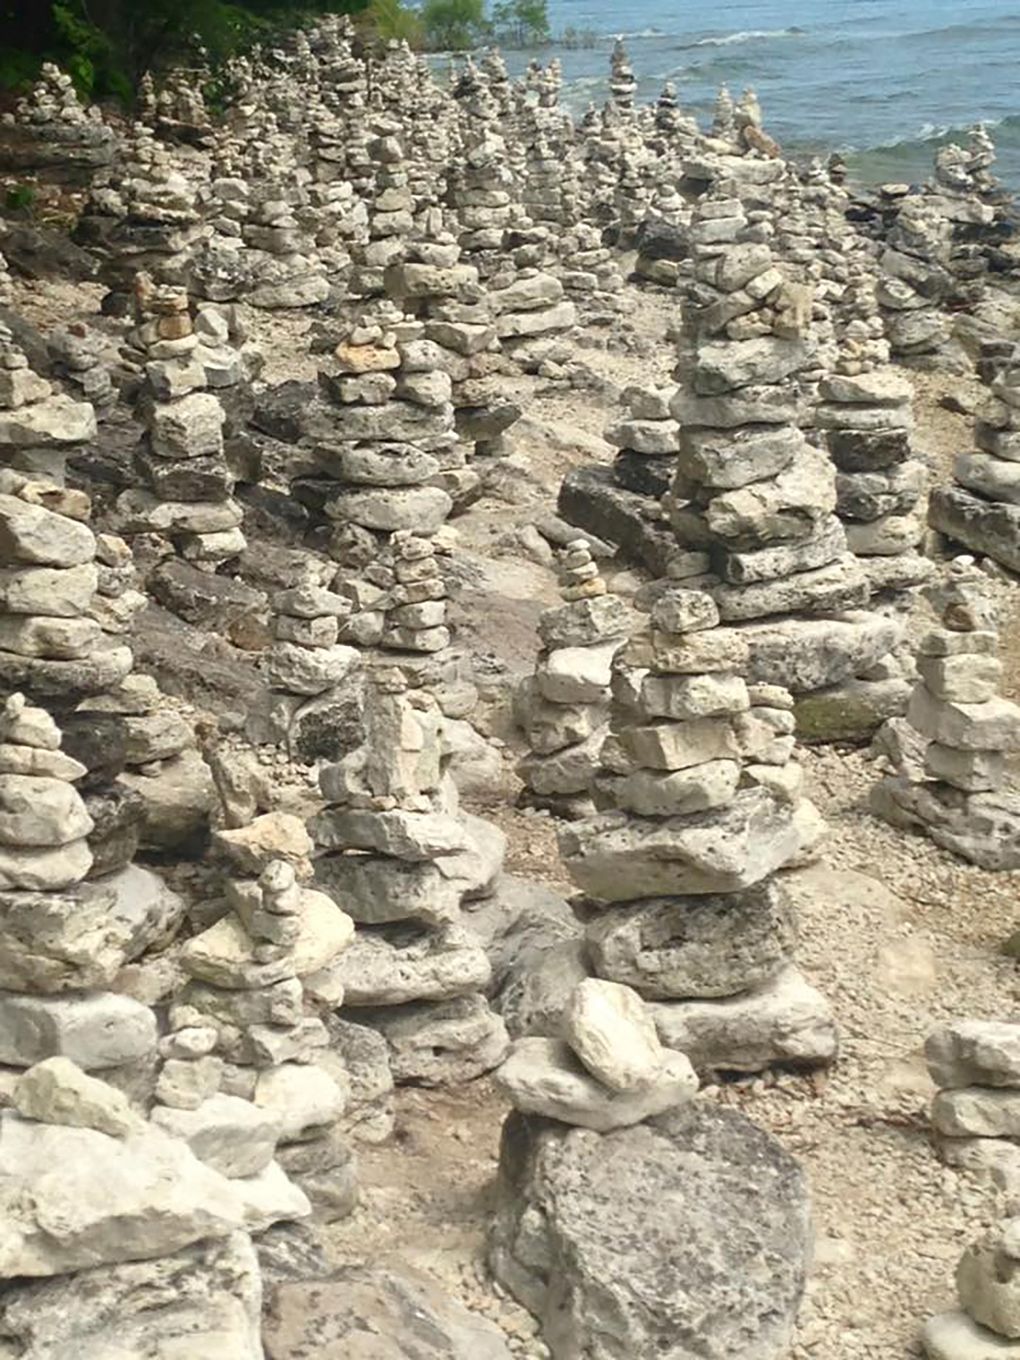 Works of art or monuments to ego? Rock-stacking stirs debate – Twin Cities